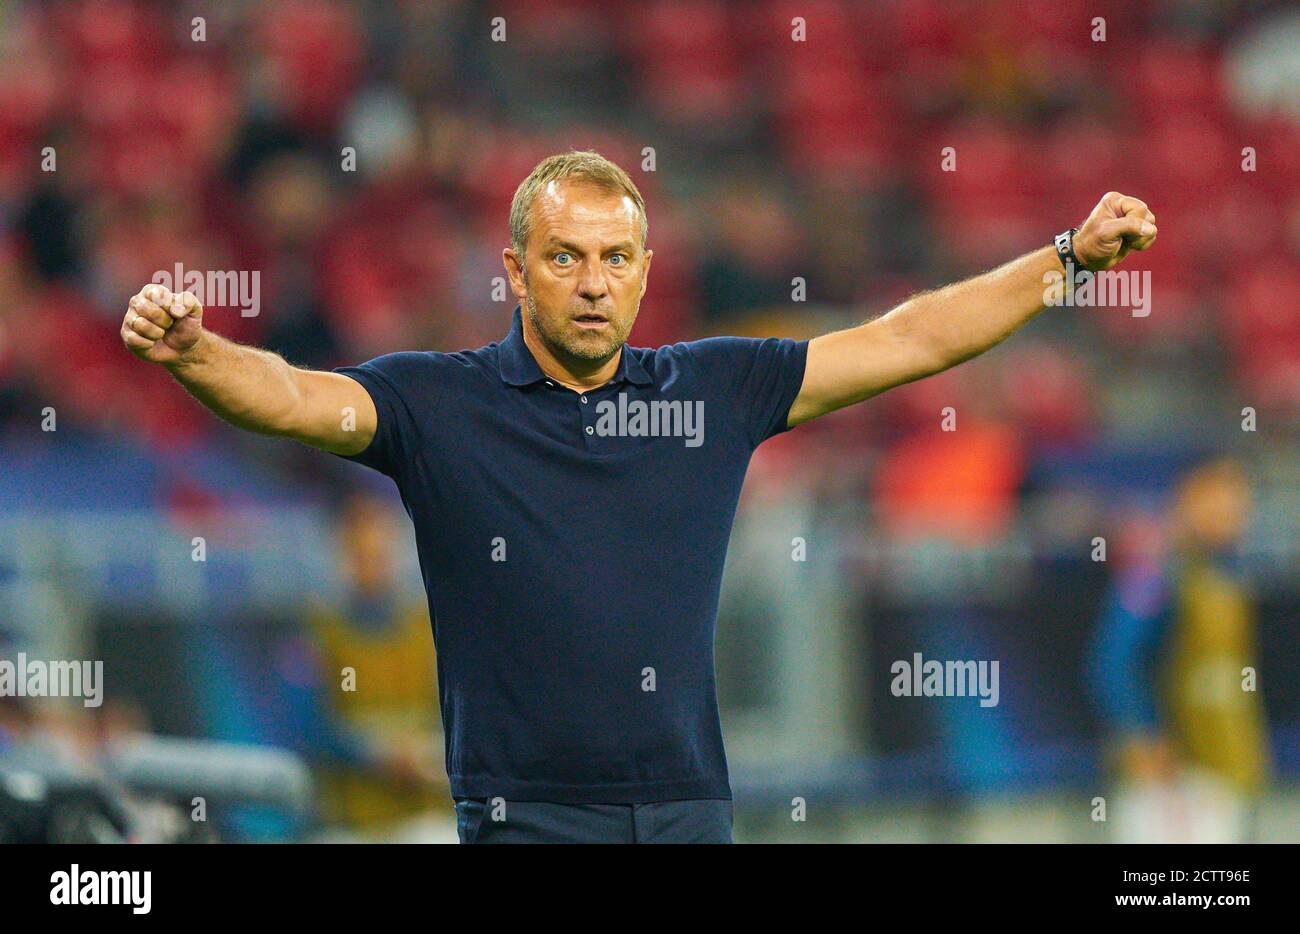 Budapest, Hungary, 24th September 2020.   Trainer Hansi FLICK (FCB), team manager, headcoach, coach,  jubel in the Final UEFA Supercup match FC BAYERN MUENCHEN - FC SEVILLA  in Season 2019/2020, FCB, Munich, © Peter Schatz / Alamy Live News    - UEFA REGULATIONS PROHIBIT ANY USE OF PHOTOGRAPHS as IMAGE SEQUENCES and/or QUASI-VIDEO -  National and international News-Agencies OUT Editorial Use ONLY Stock Photo